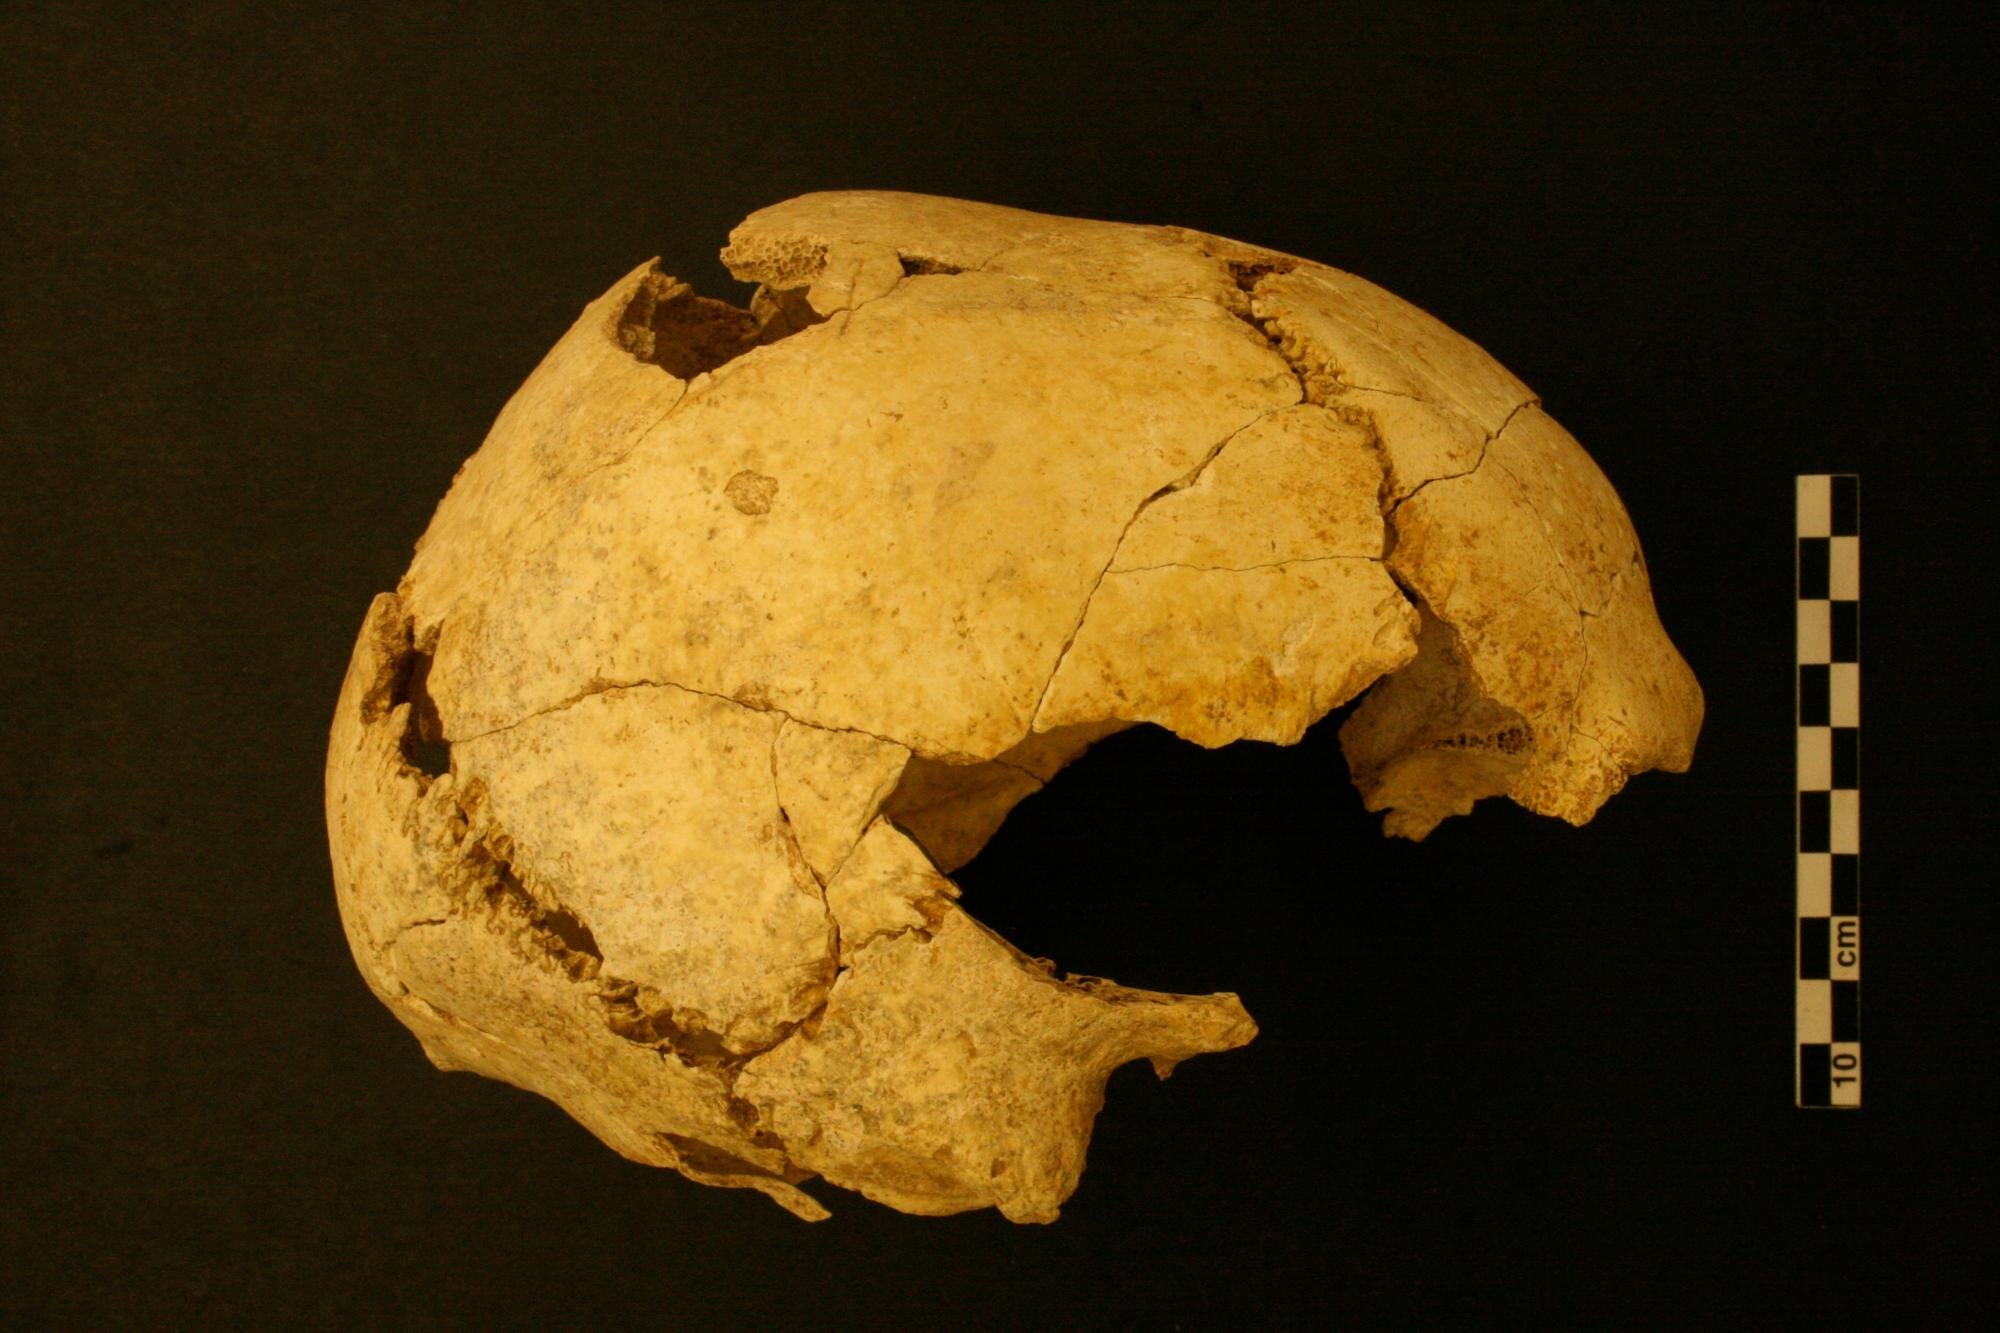 Human skull of Mollet III at Serinyà from the ancient excavation. Image: Joaquim Soler